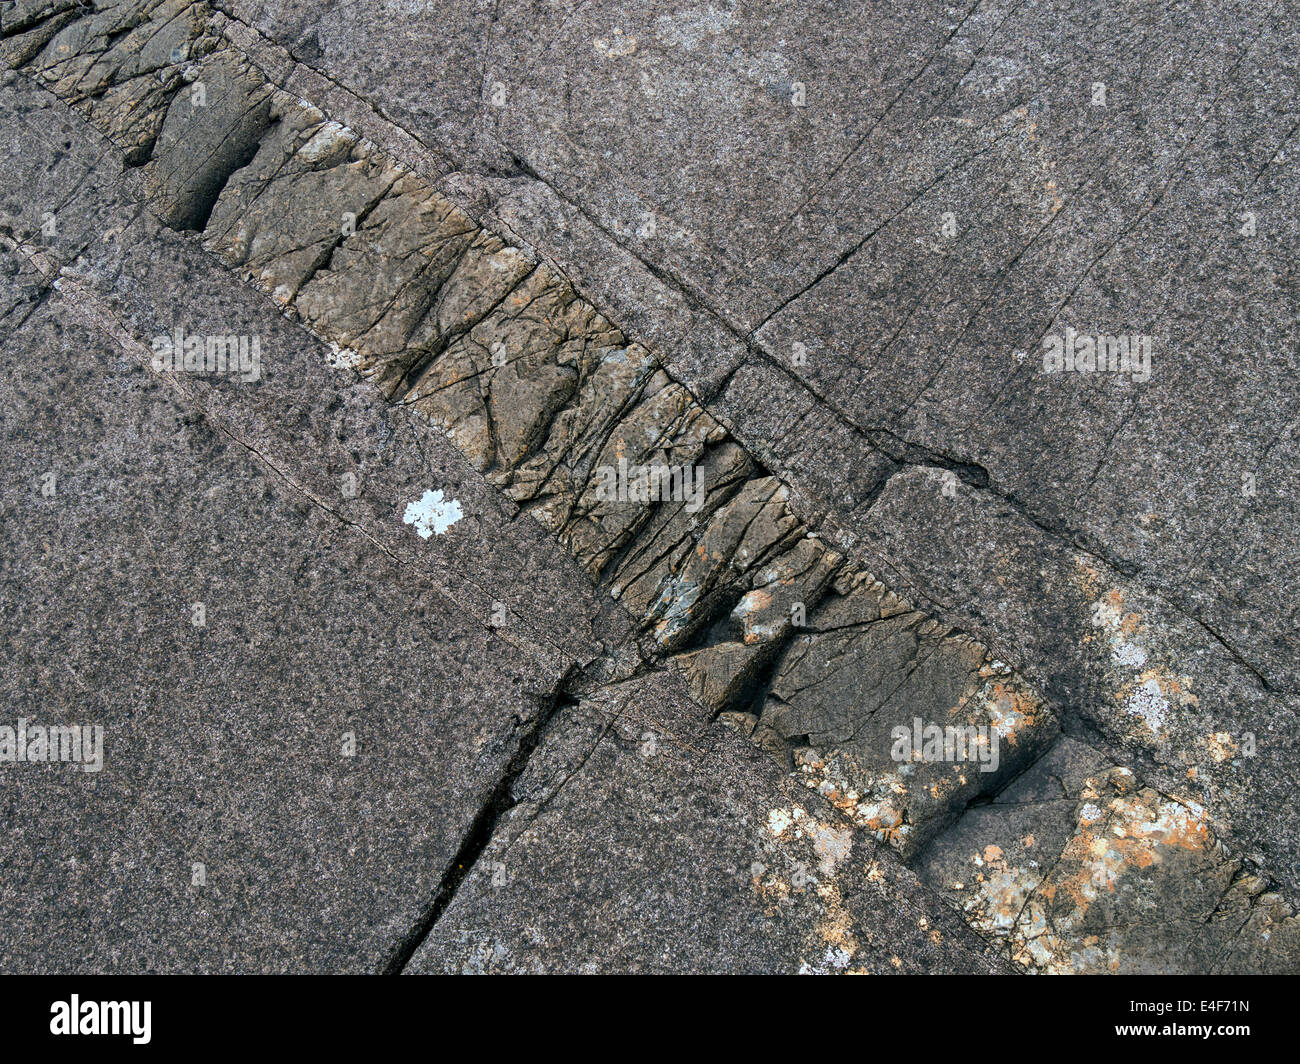 Seam of igneous intrusion in glacial smoothed and scored gabbro rock, Isle of Skye, Scotland, UK Stock Photo